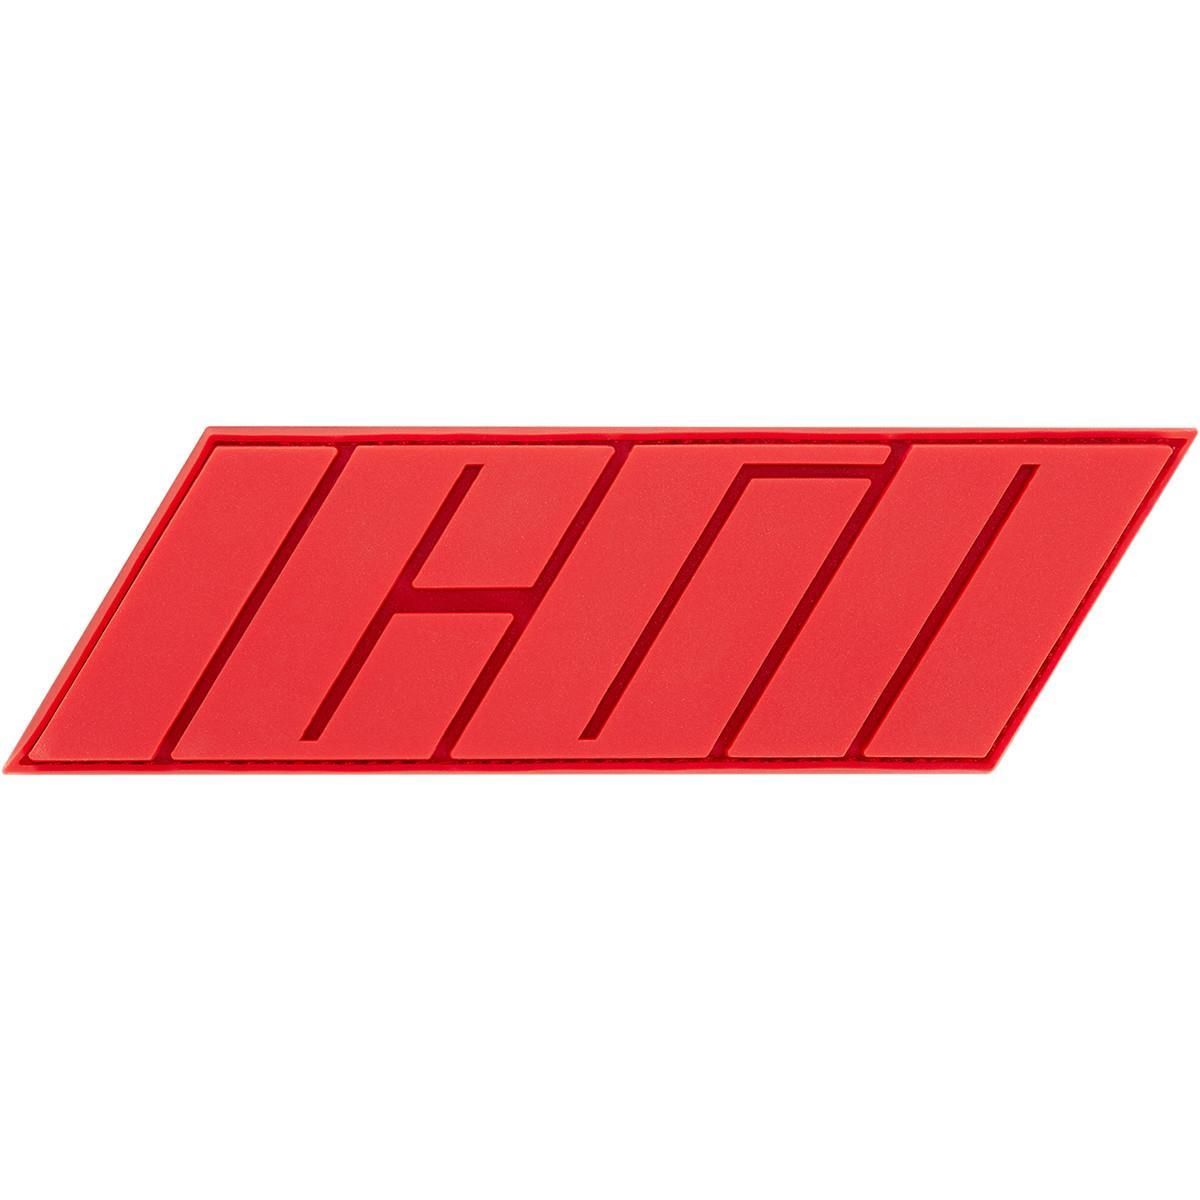 2IUE-ICON-28400064 Hypersport Vest Patch - Red